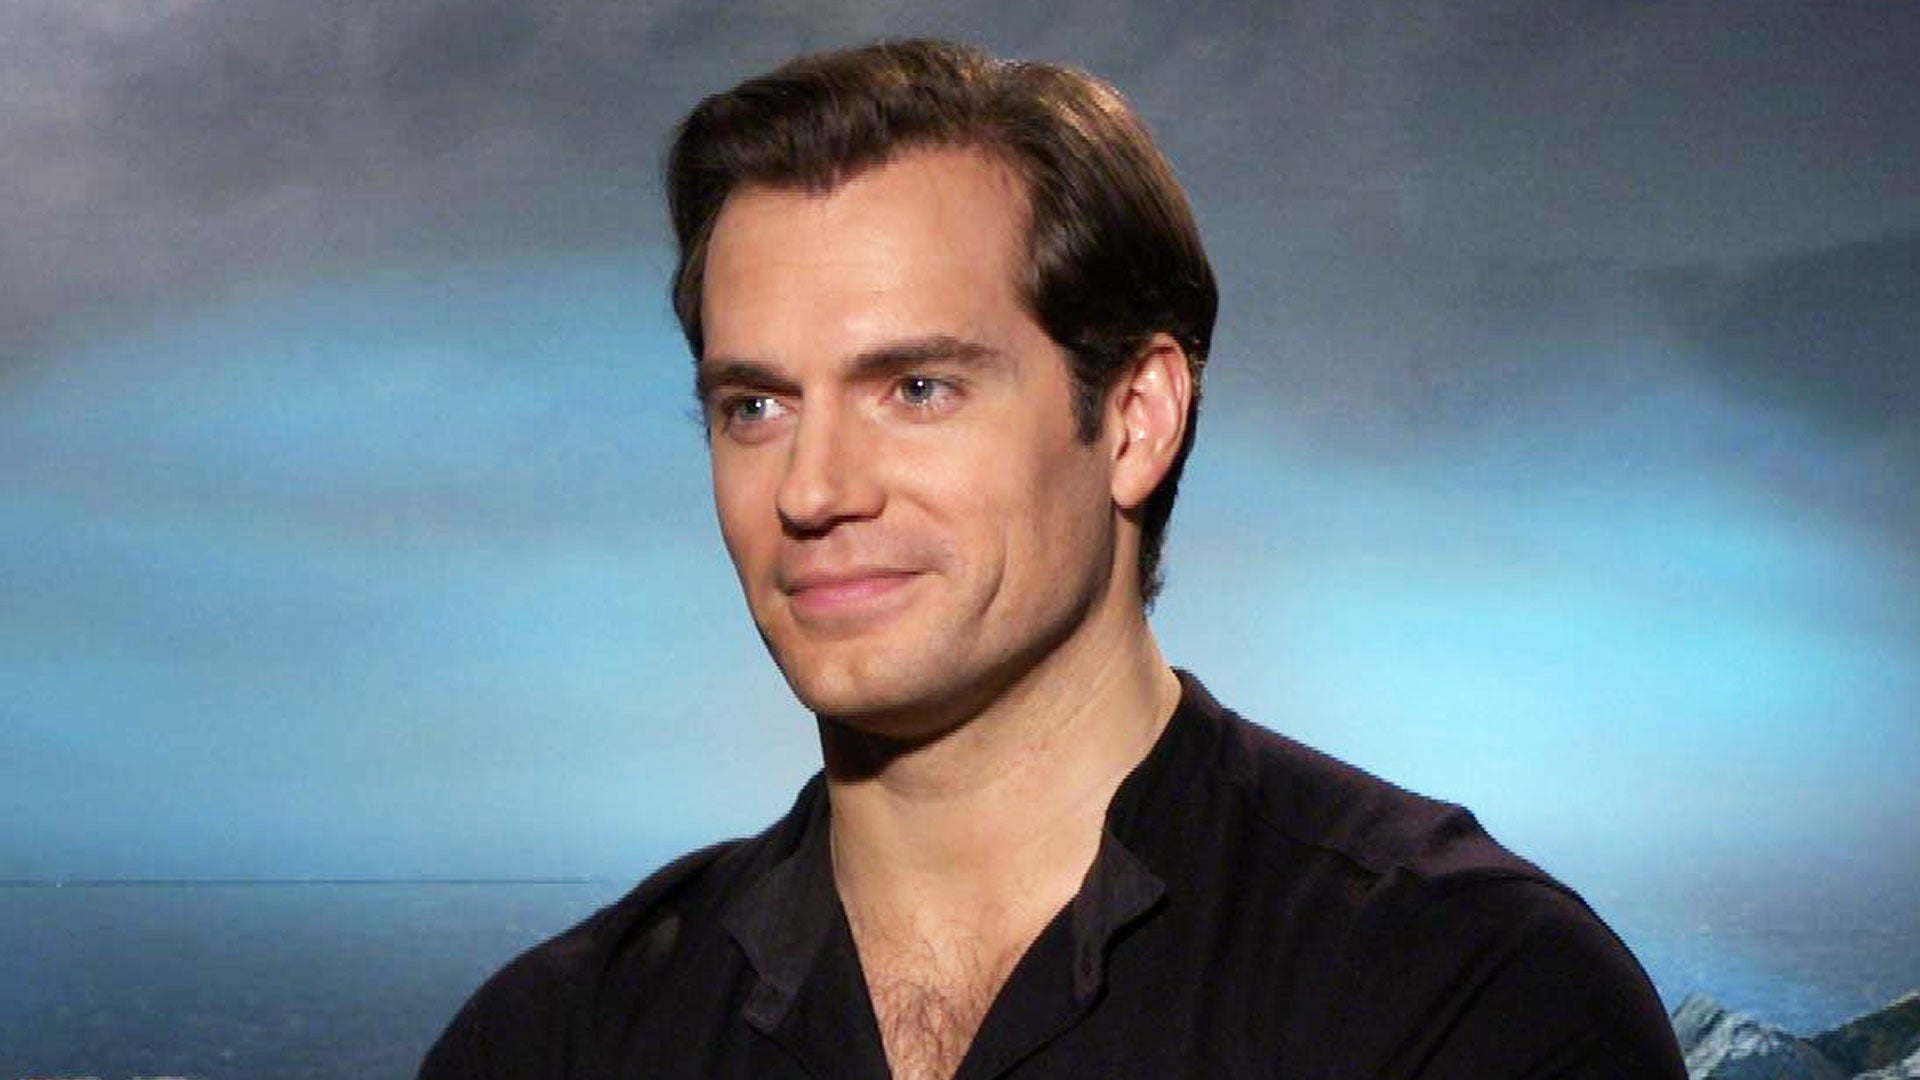 Henry Cavill and Sam Claflin were cast so well as brothers in Enola Holmes.  : r/LadyBoners